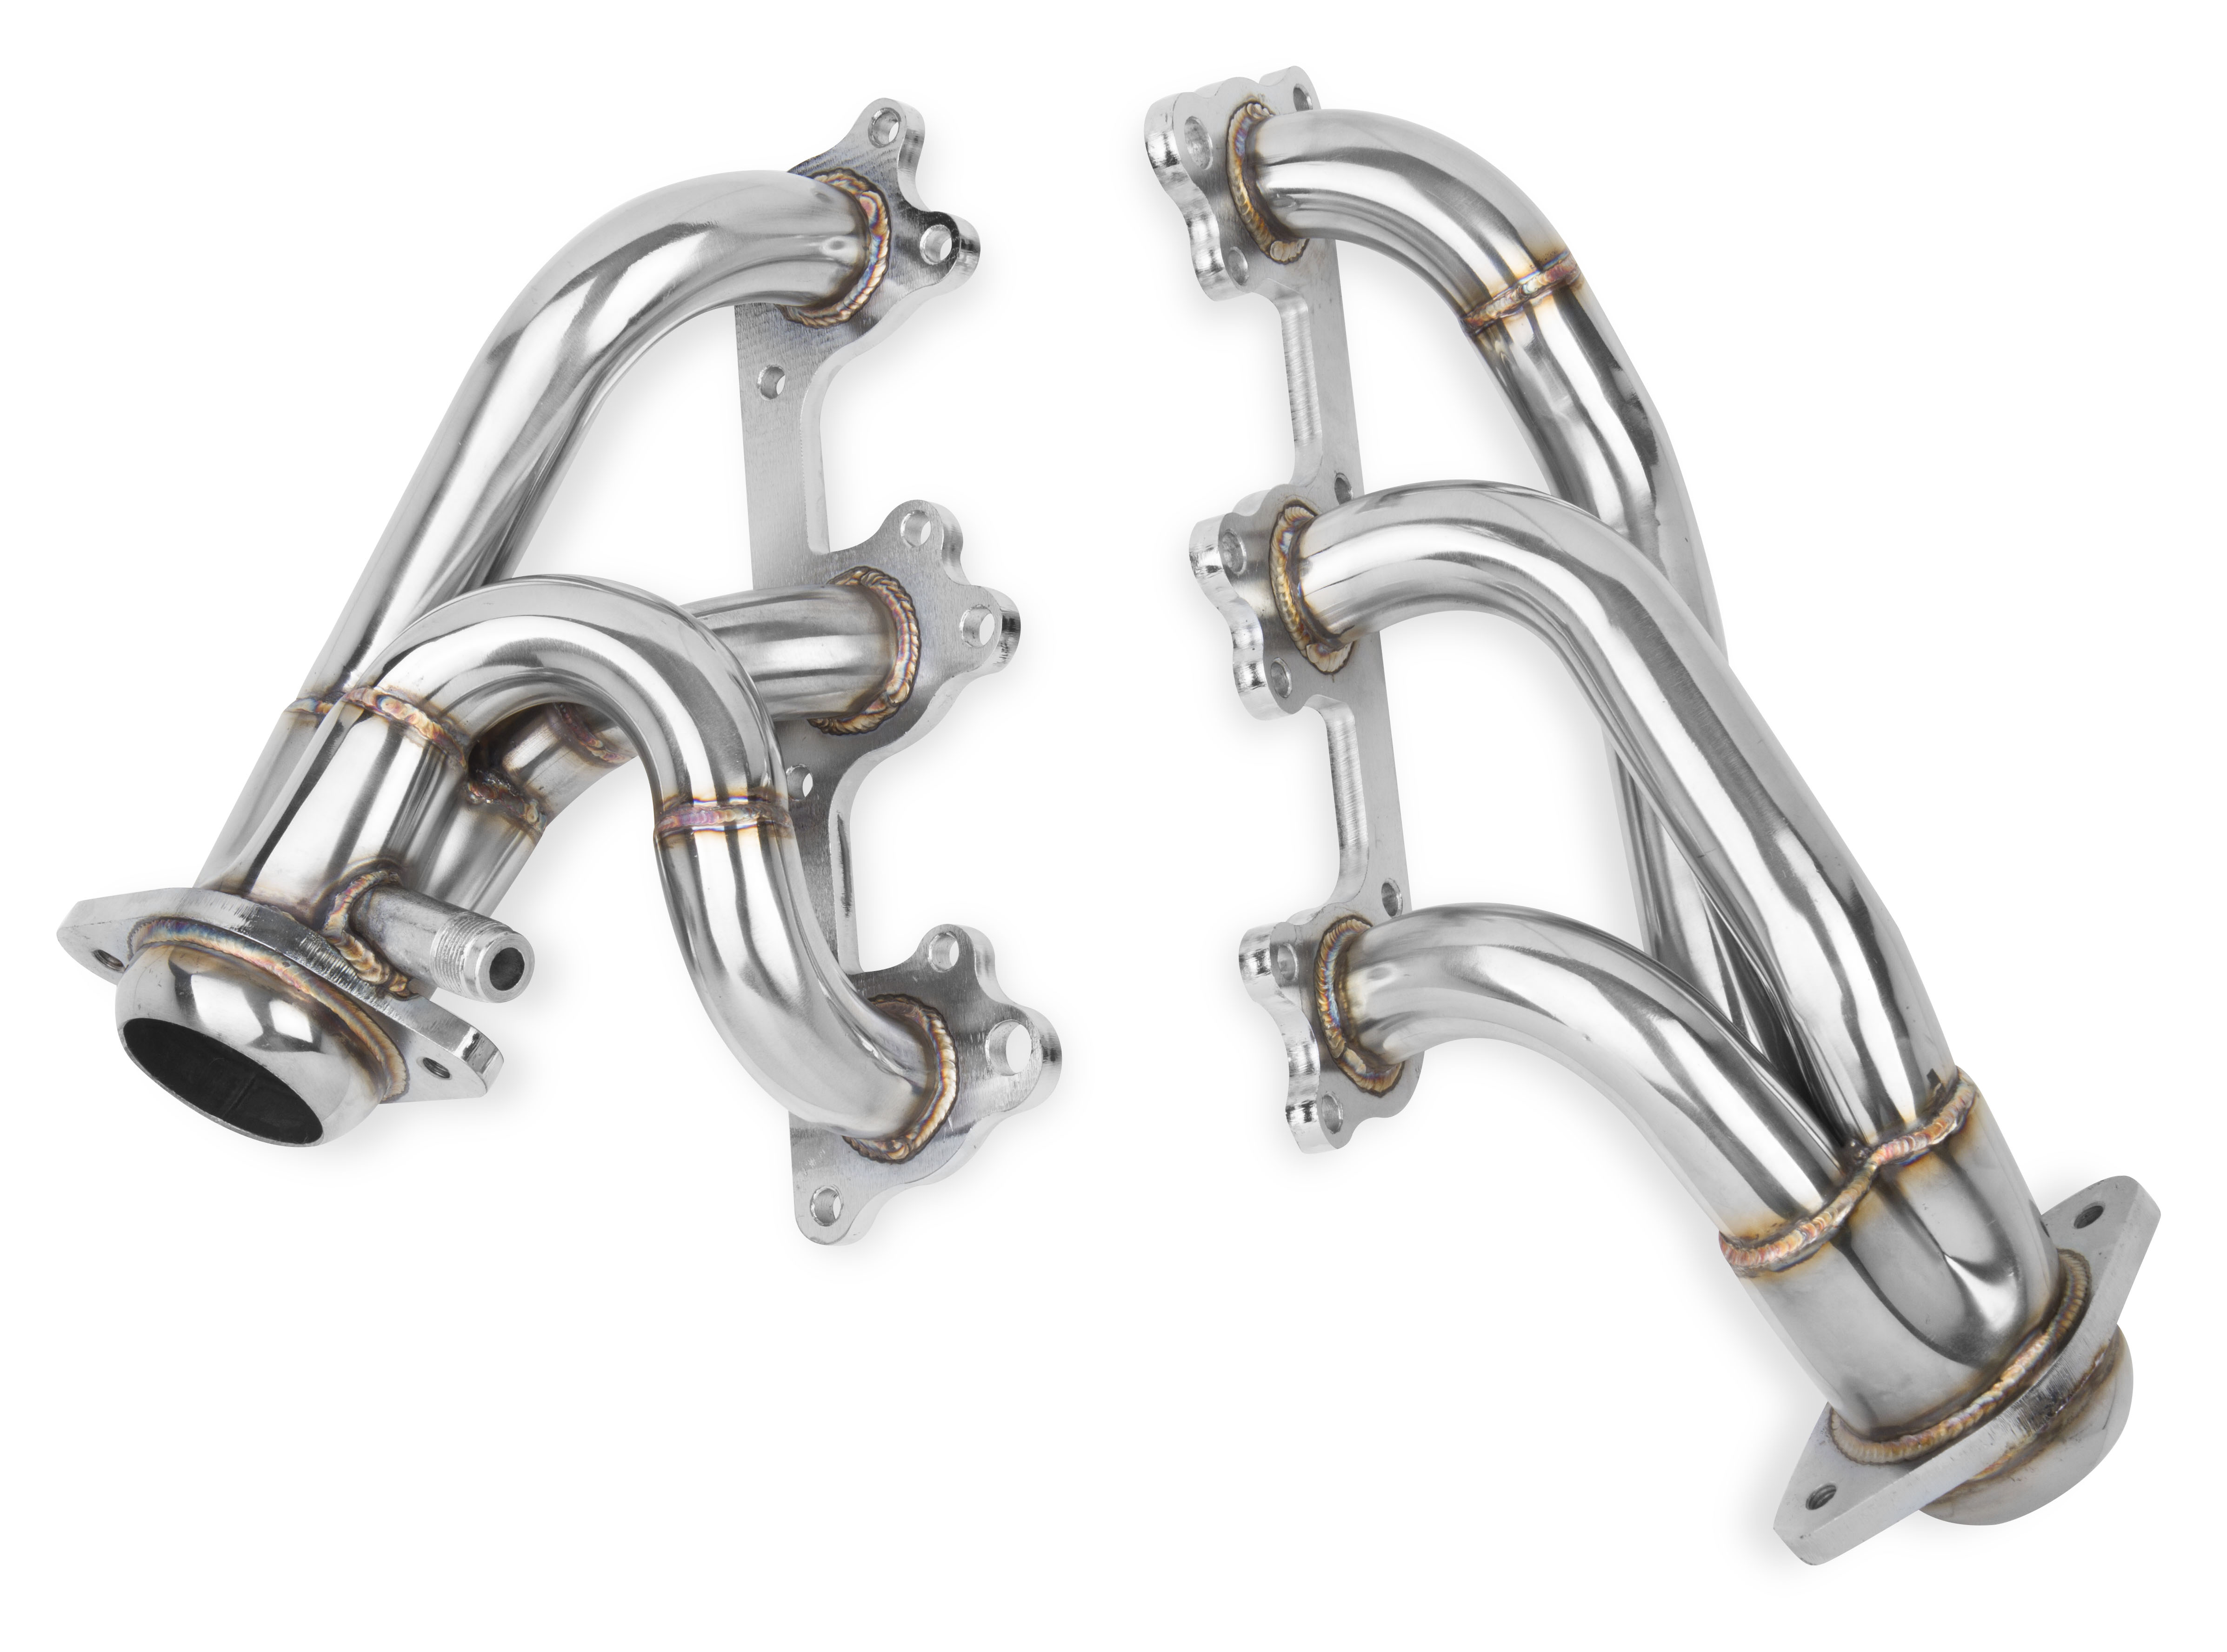 2005-2010 Ford Mustang 4.0L V6 Flowtech Stainless Steel 1 1/2" Shorty Headers - Polished